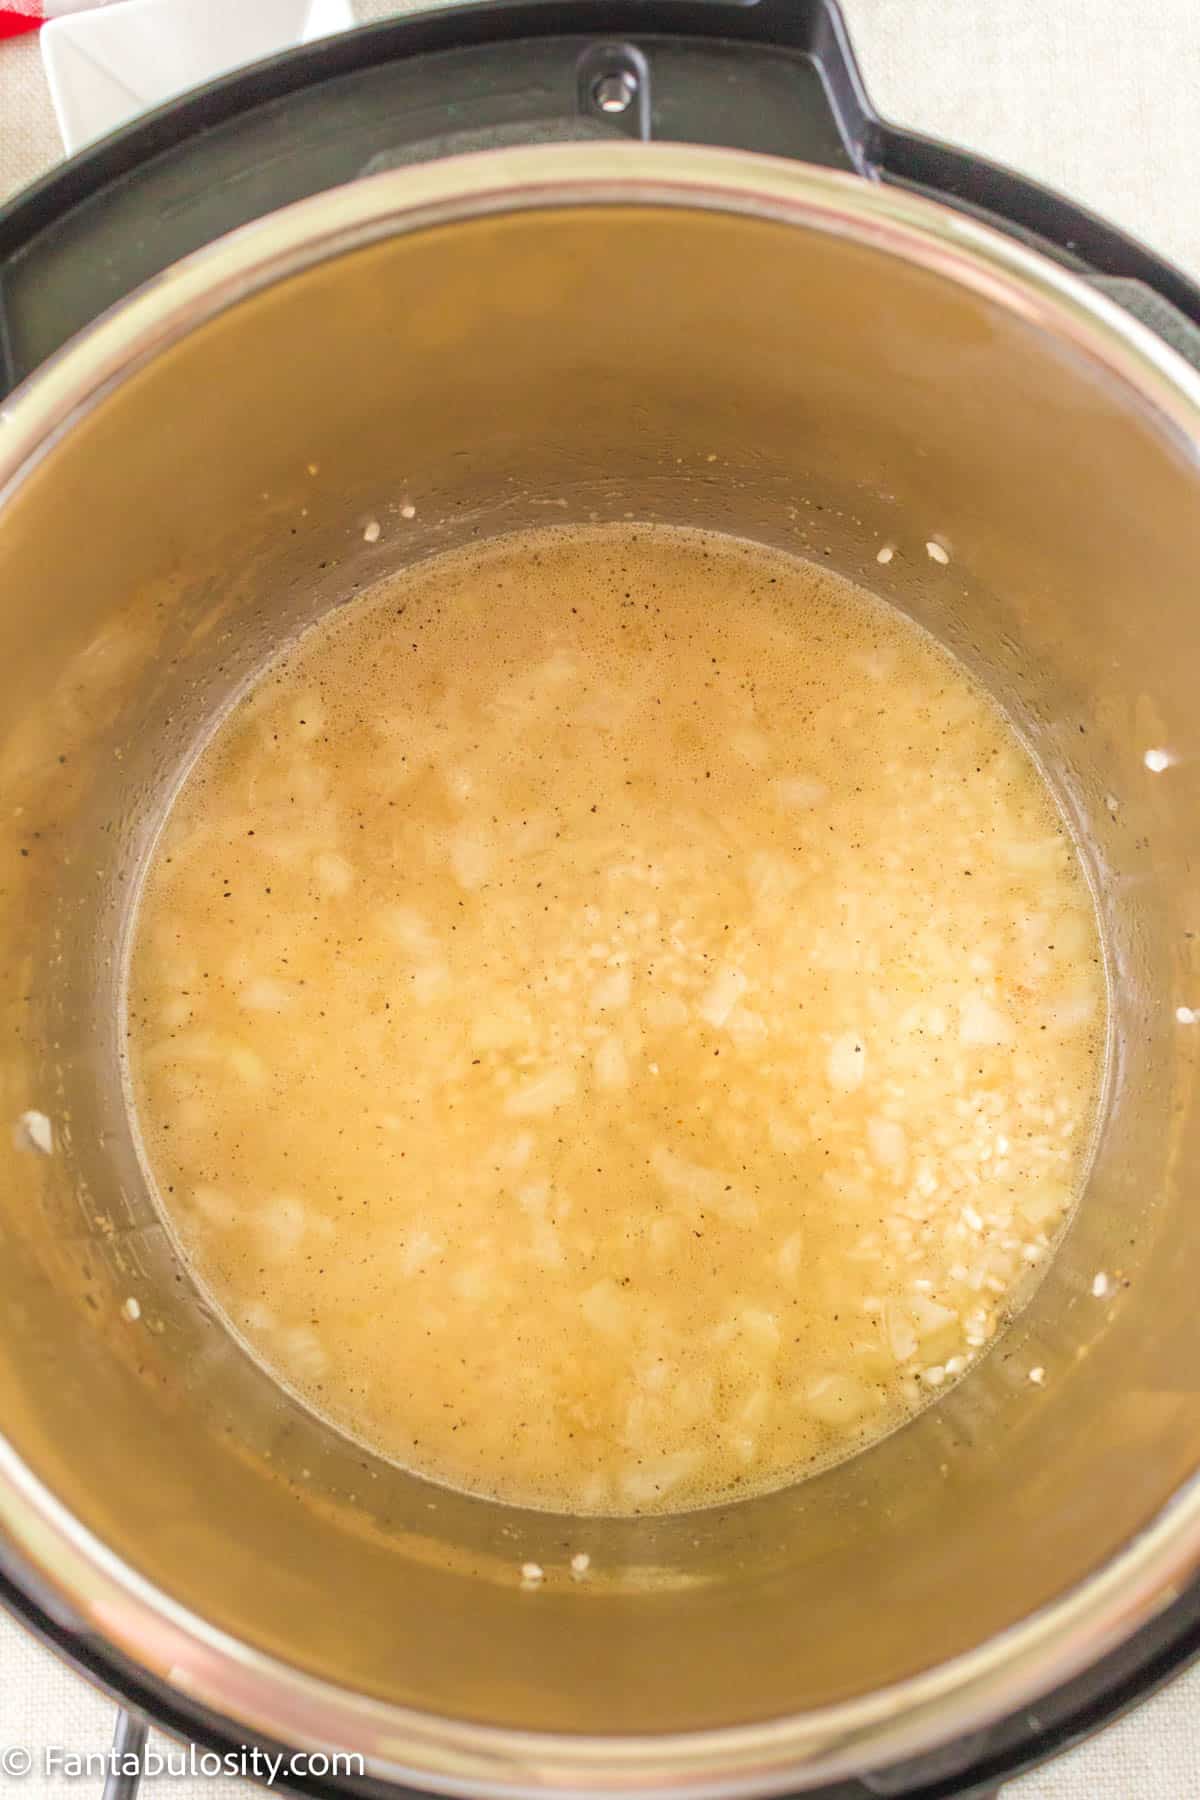 Rice, chicken broth, and spices in the Instant Pot.